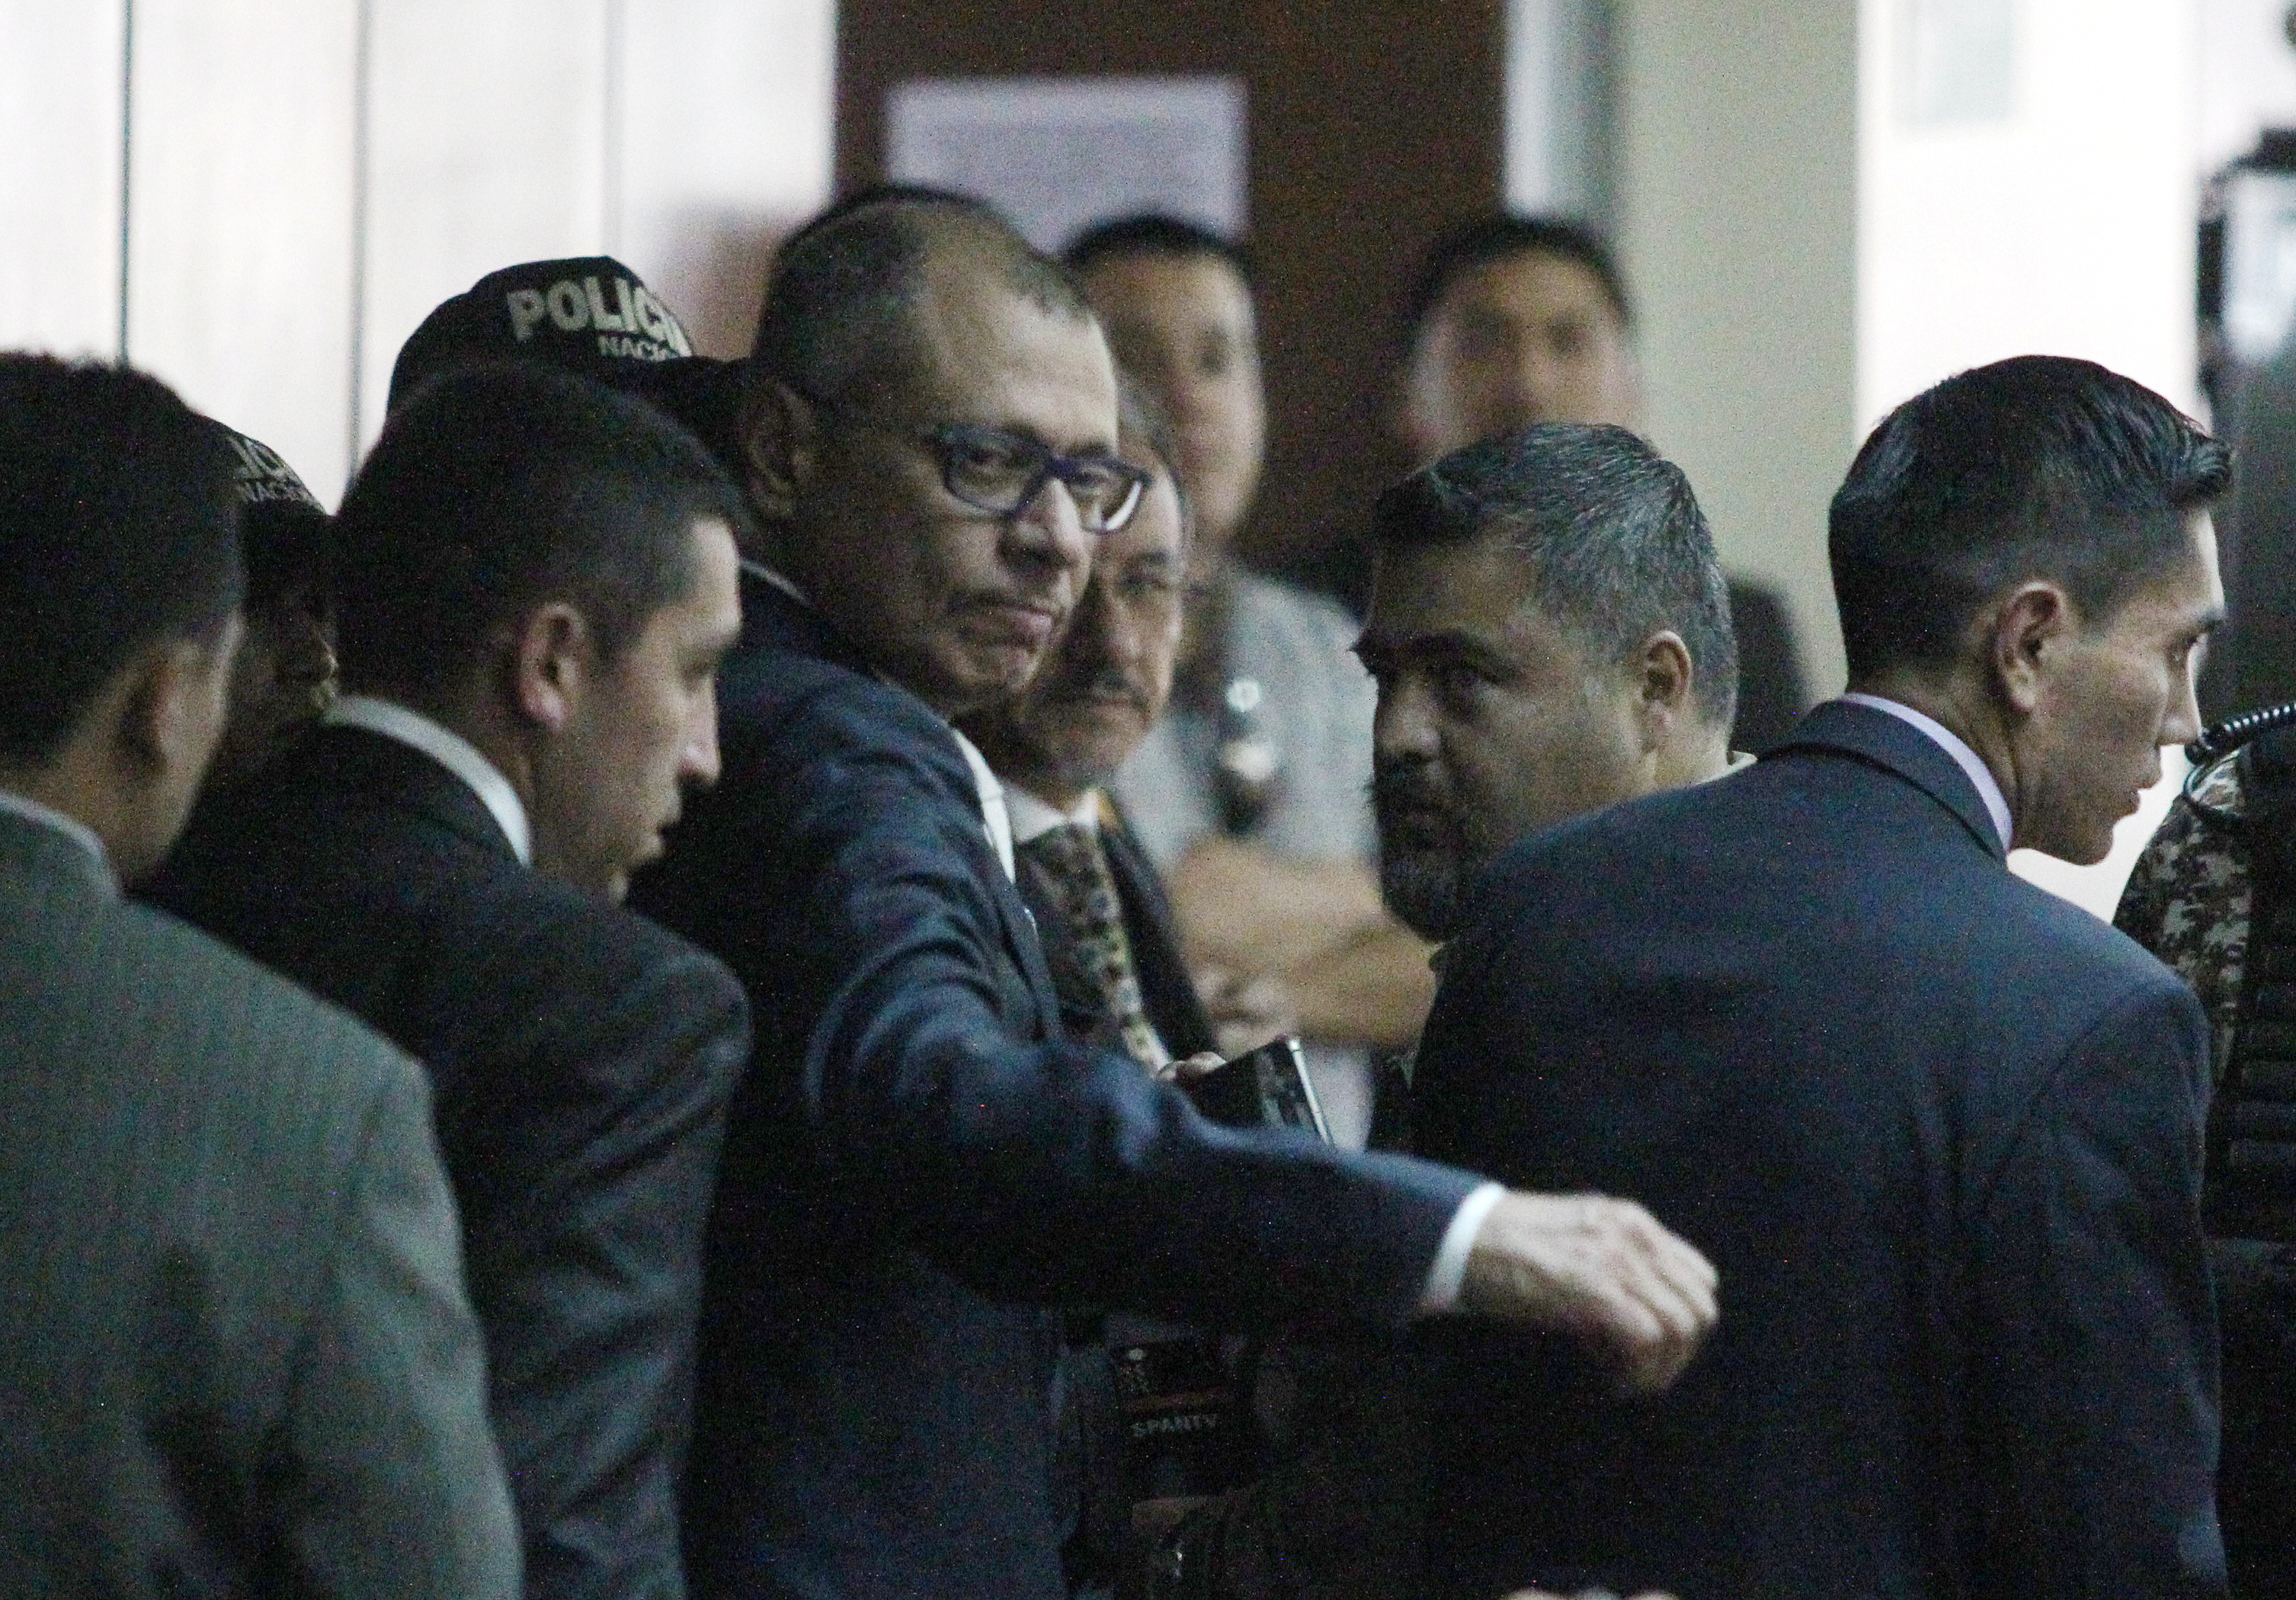 Ecuadorean Vice President Jorge Glas reacts as he arrives to court, to attend his trial on bribery from Brazilian construction company Odebrecht, in Quito